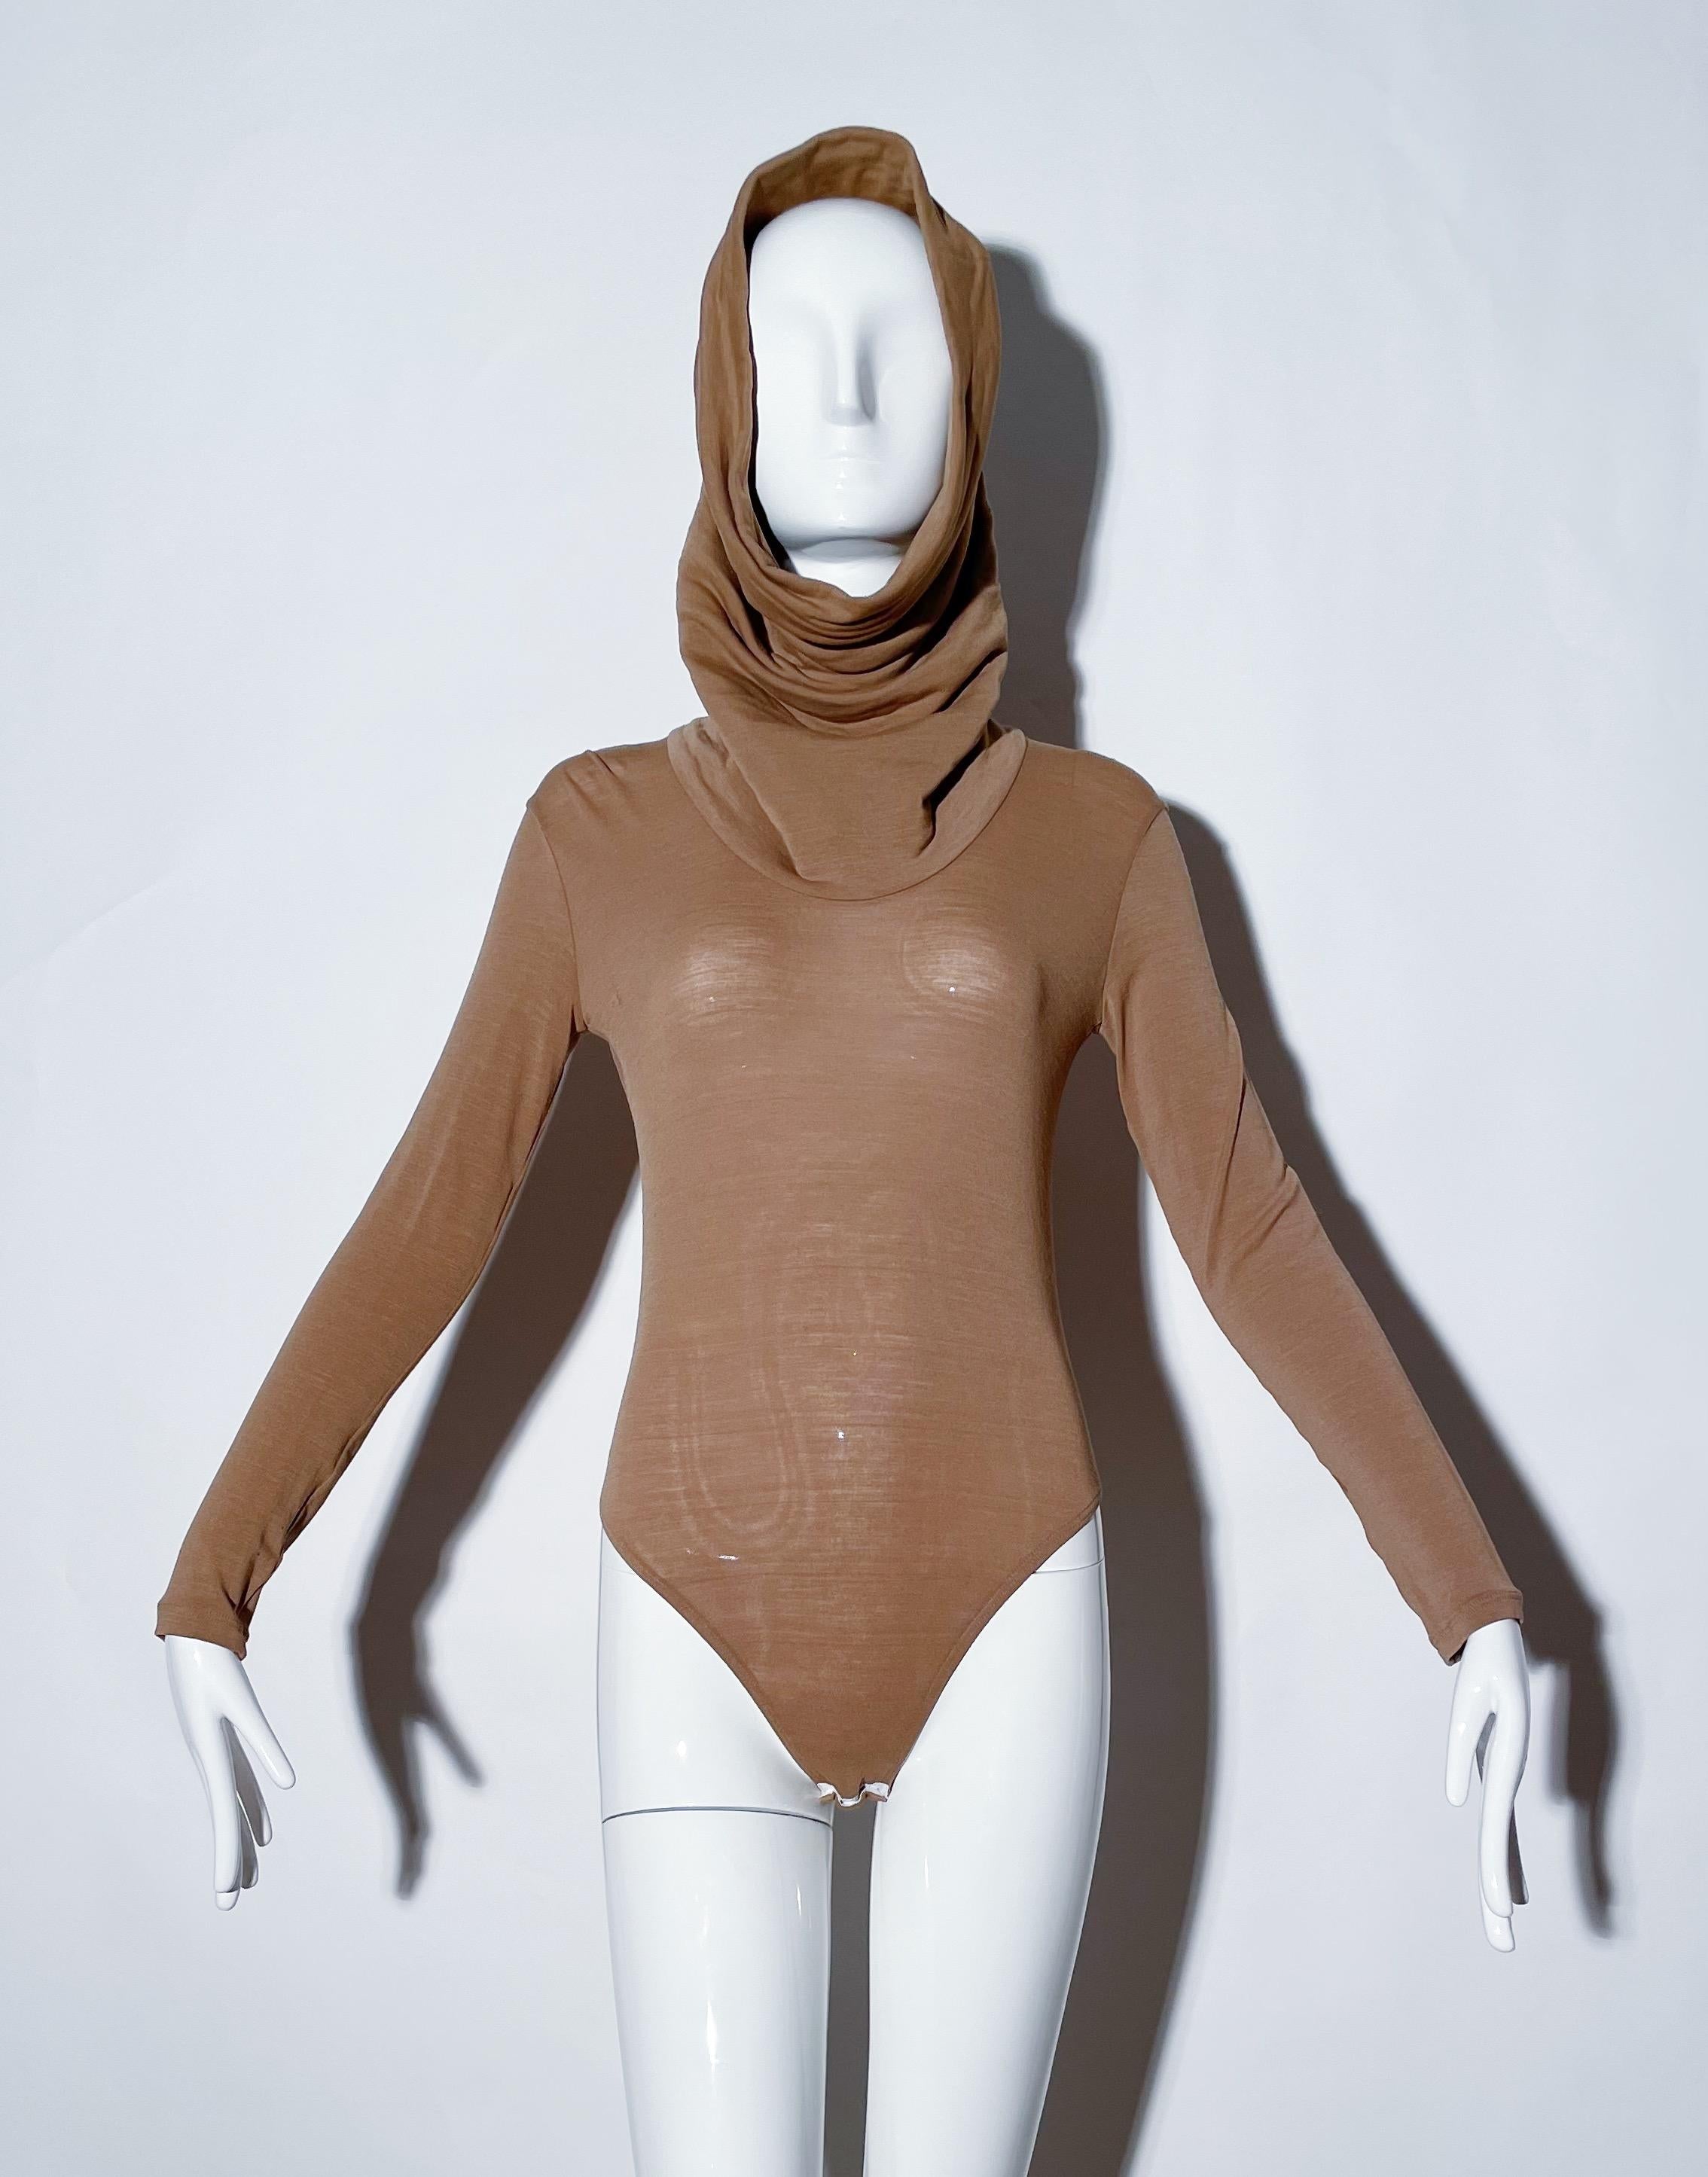 Nude cowl neck bodysuit. Giant, dramatic cowl neck. Snap gusset. Stretchy. Spandex. Made In Italy. 
*Condition: fair vintage condition, small imperfections throughout ( as pictured ) 

Marked size: 8 US, best fit for a 4/6, or medium.